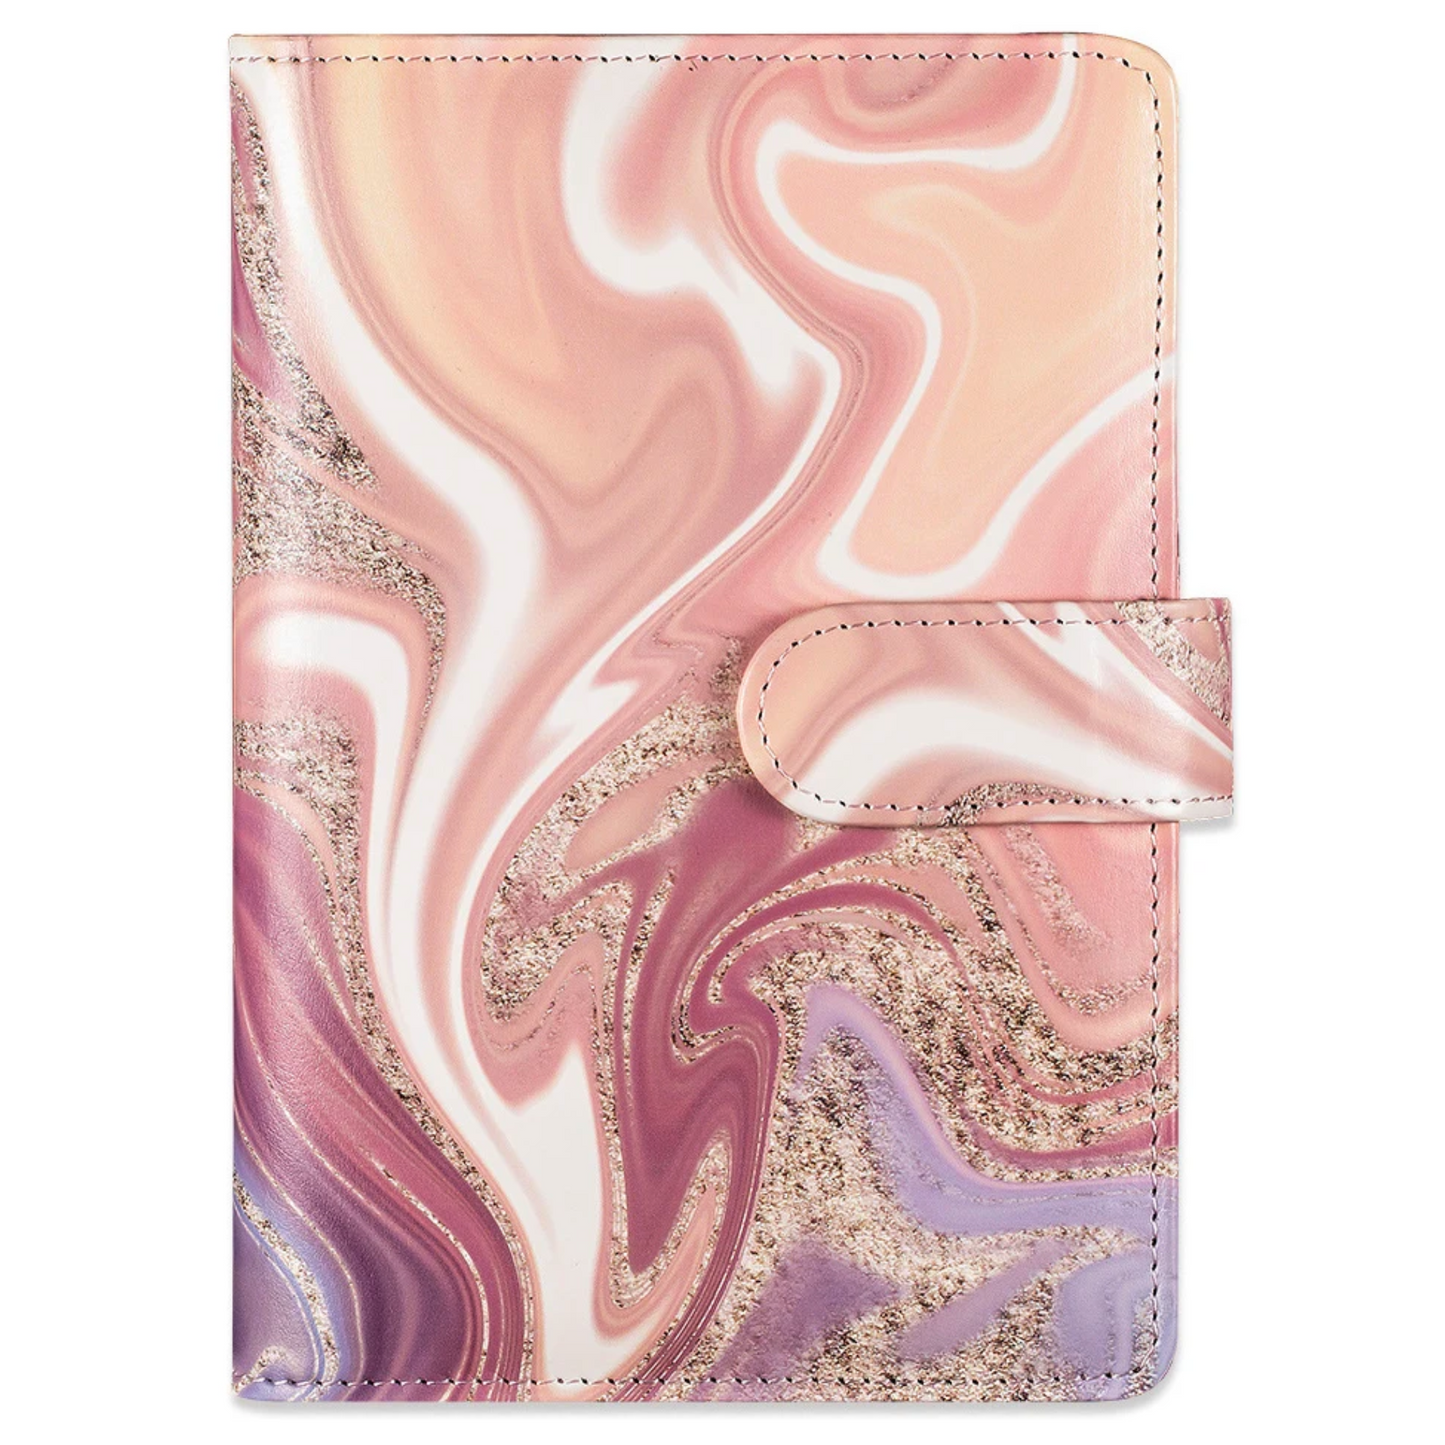 The Rich Girl Lifestyle Rose Gold Cash Binder